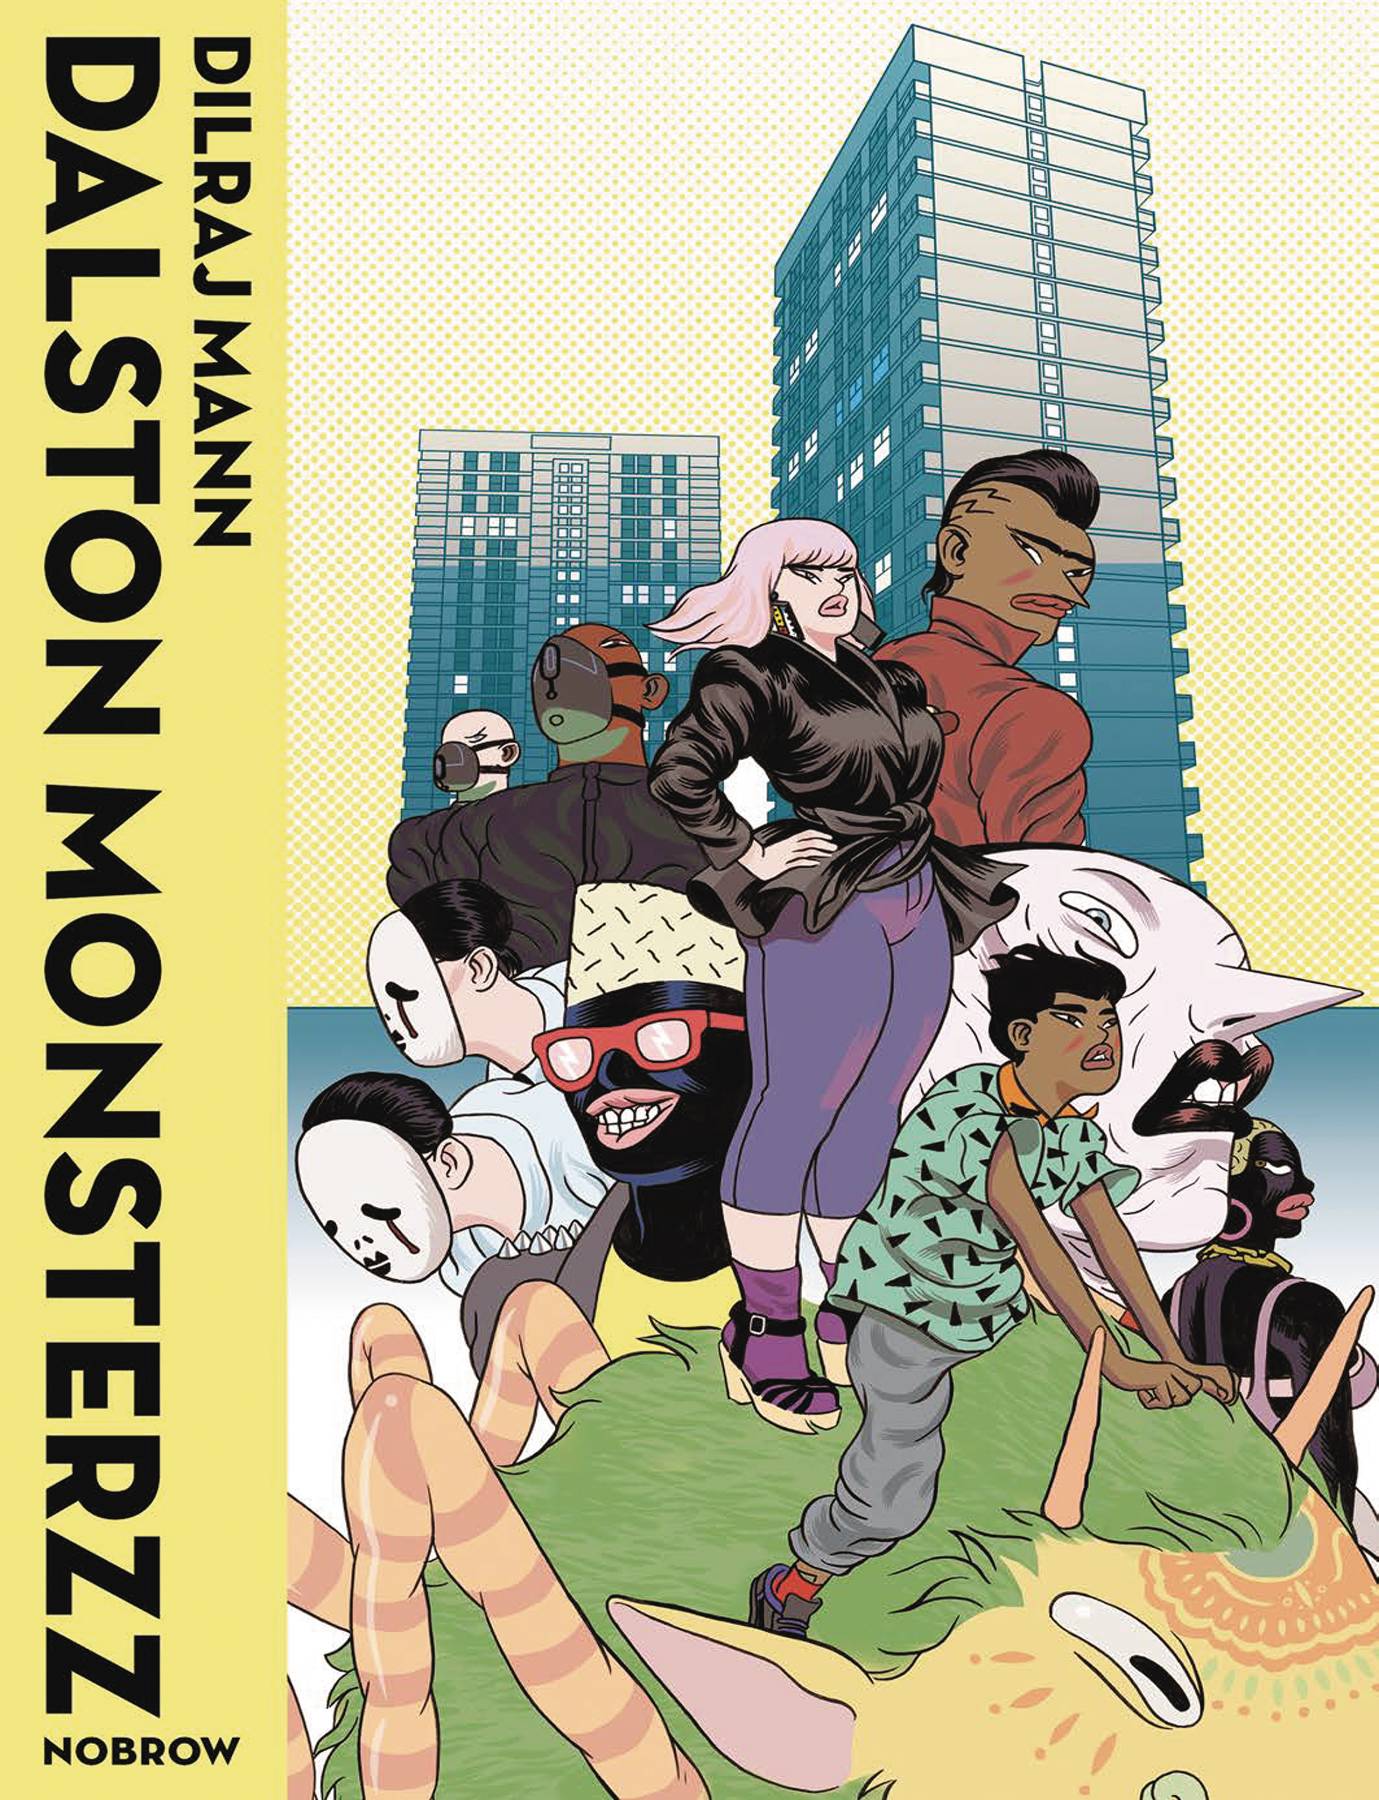 Dalston Monsterzz Graphic Novel